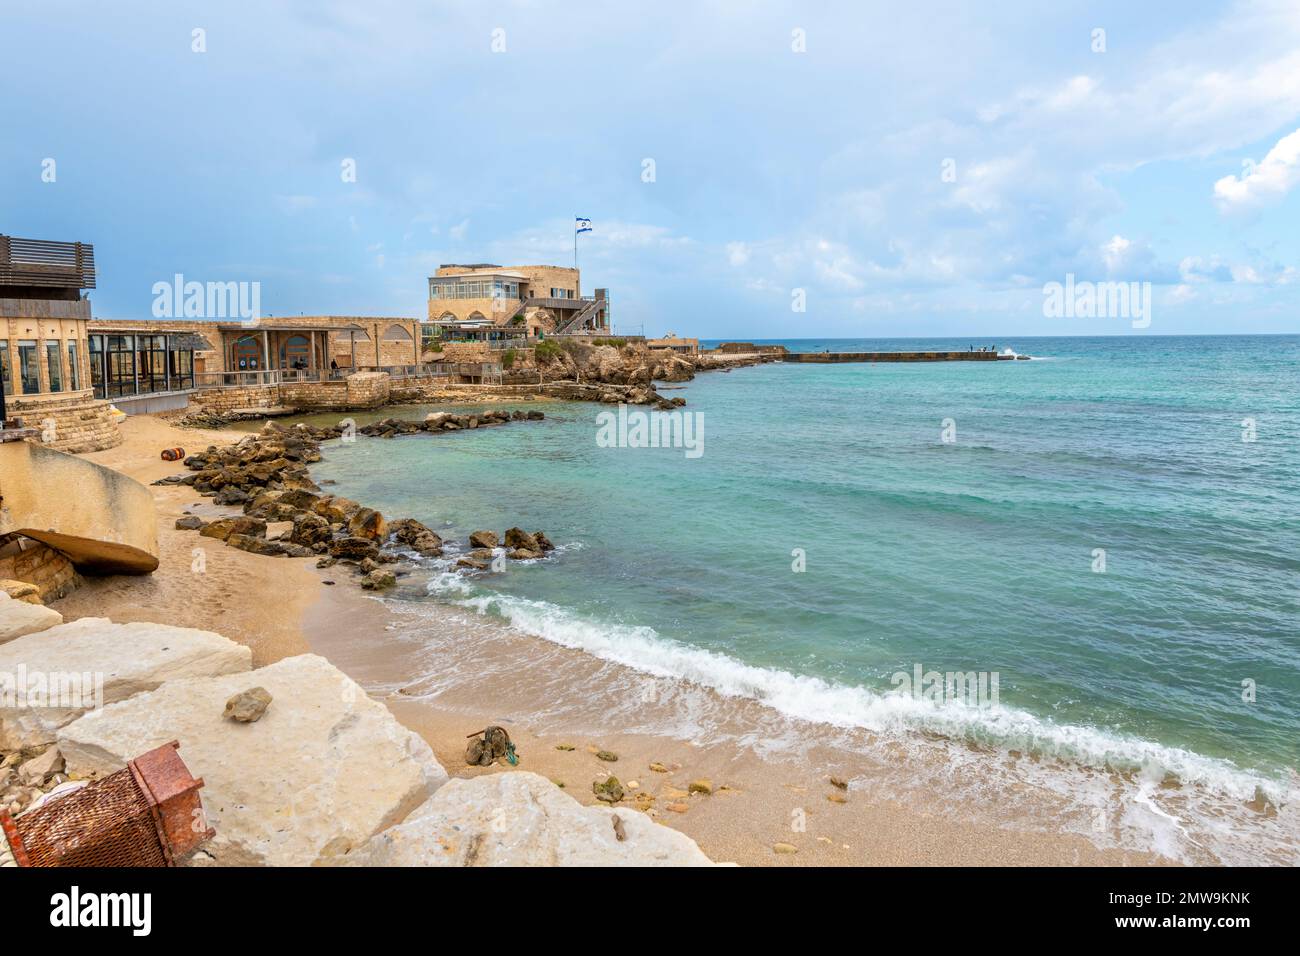 The ancient archaeological Caesarea National Park and and historic port on the Mediterranean coast of Caesarea, Israel. Stock Photo